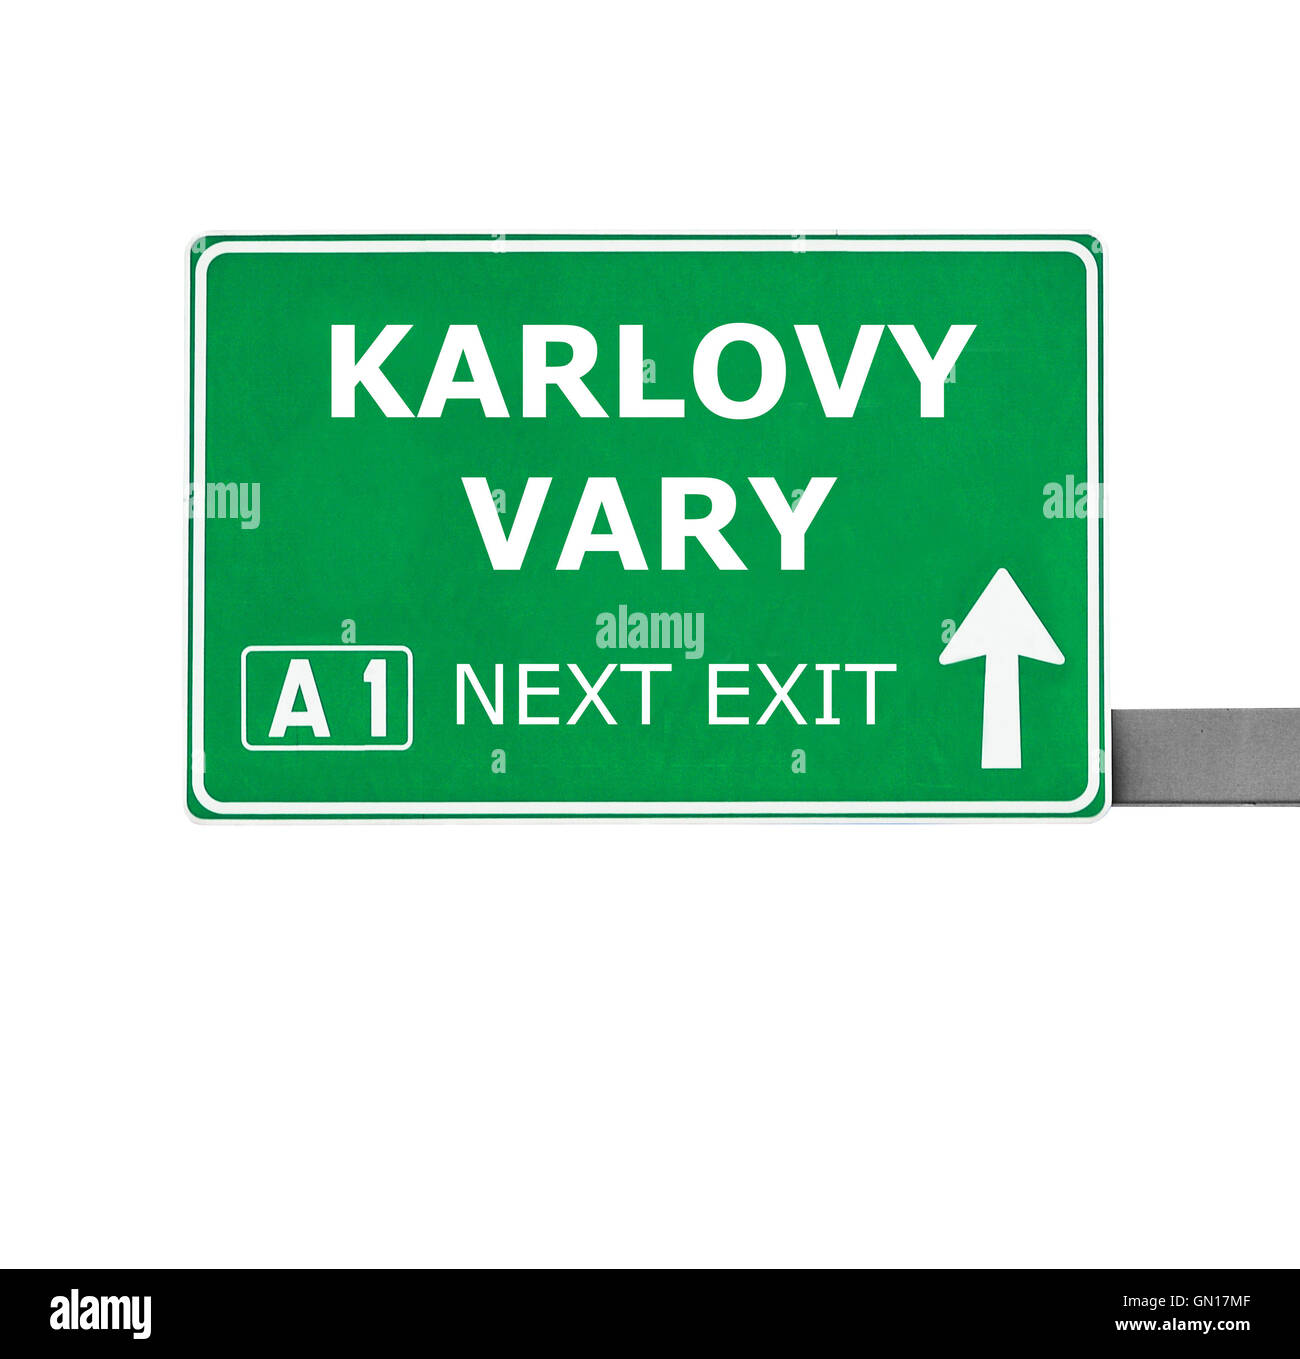 KARLOVY VARY road sign isolated on white Stock Photo